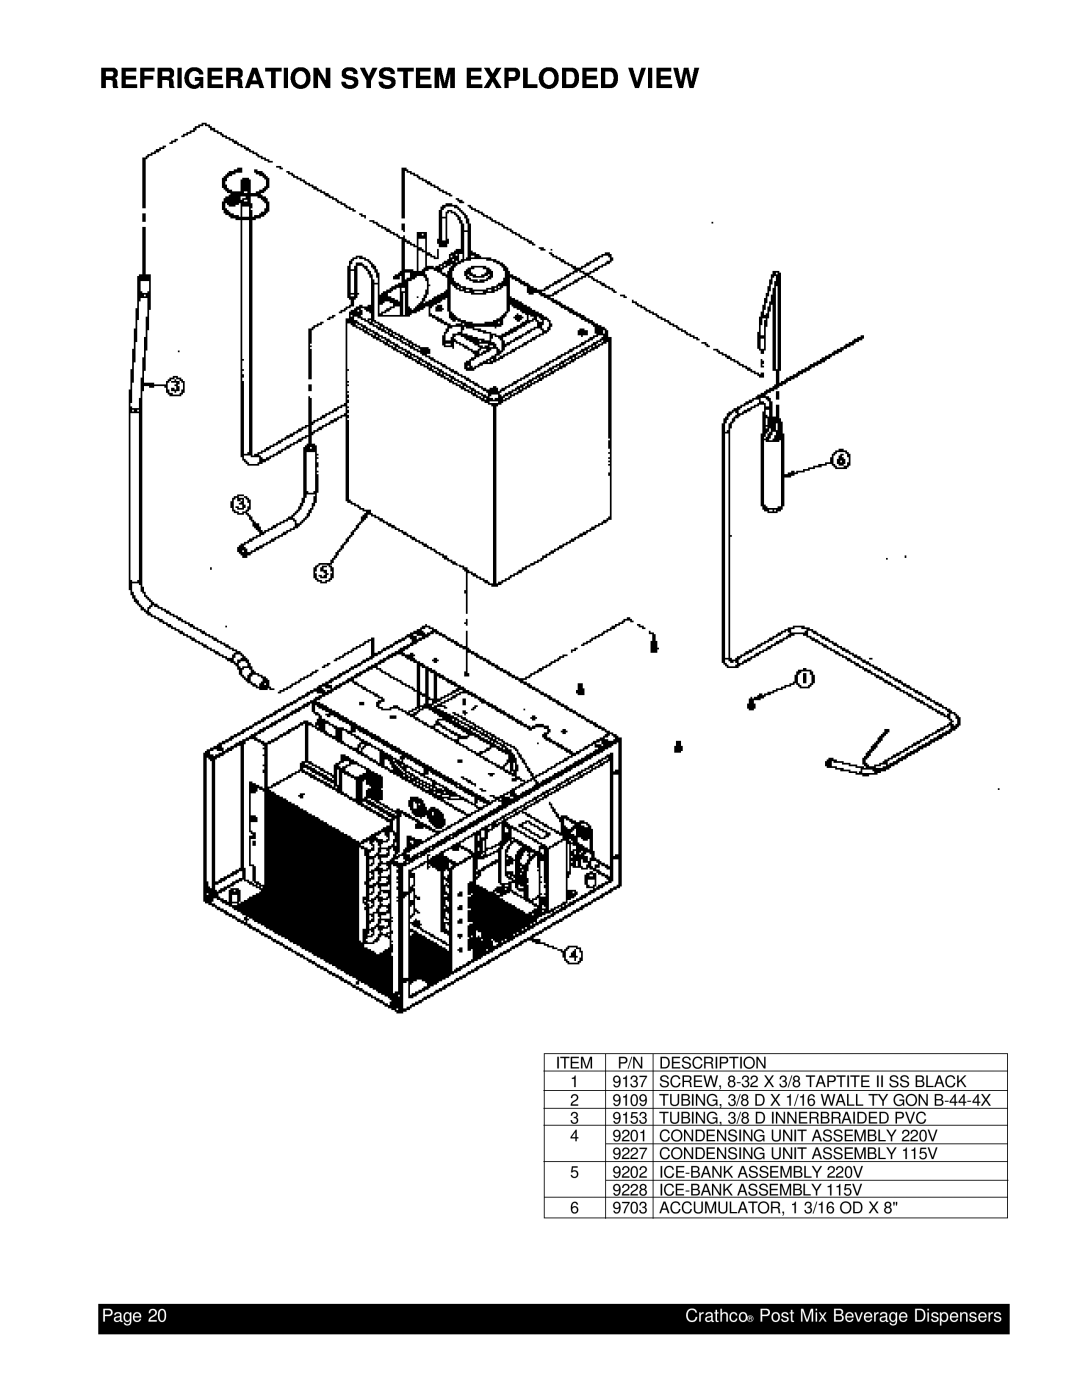 Grindmaster PM4-B, PM45-B instruction manual Refrigeration System Exploded View, Page, Crathco Post Mix Beverage Dispensers 